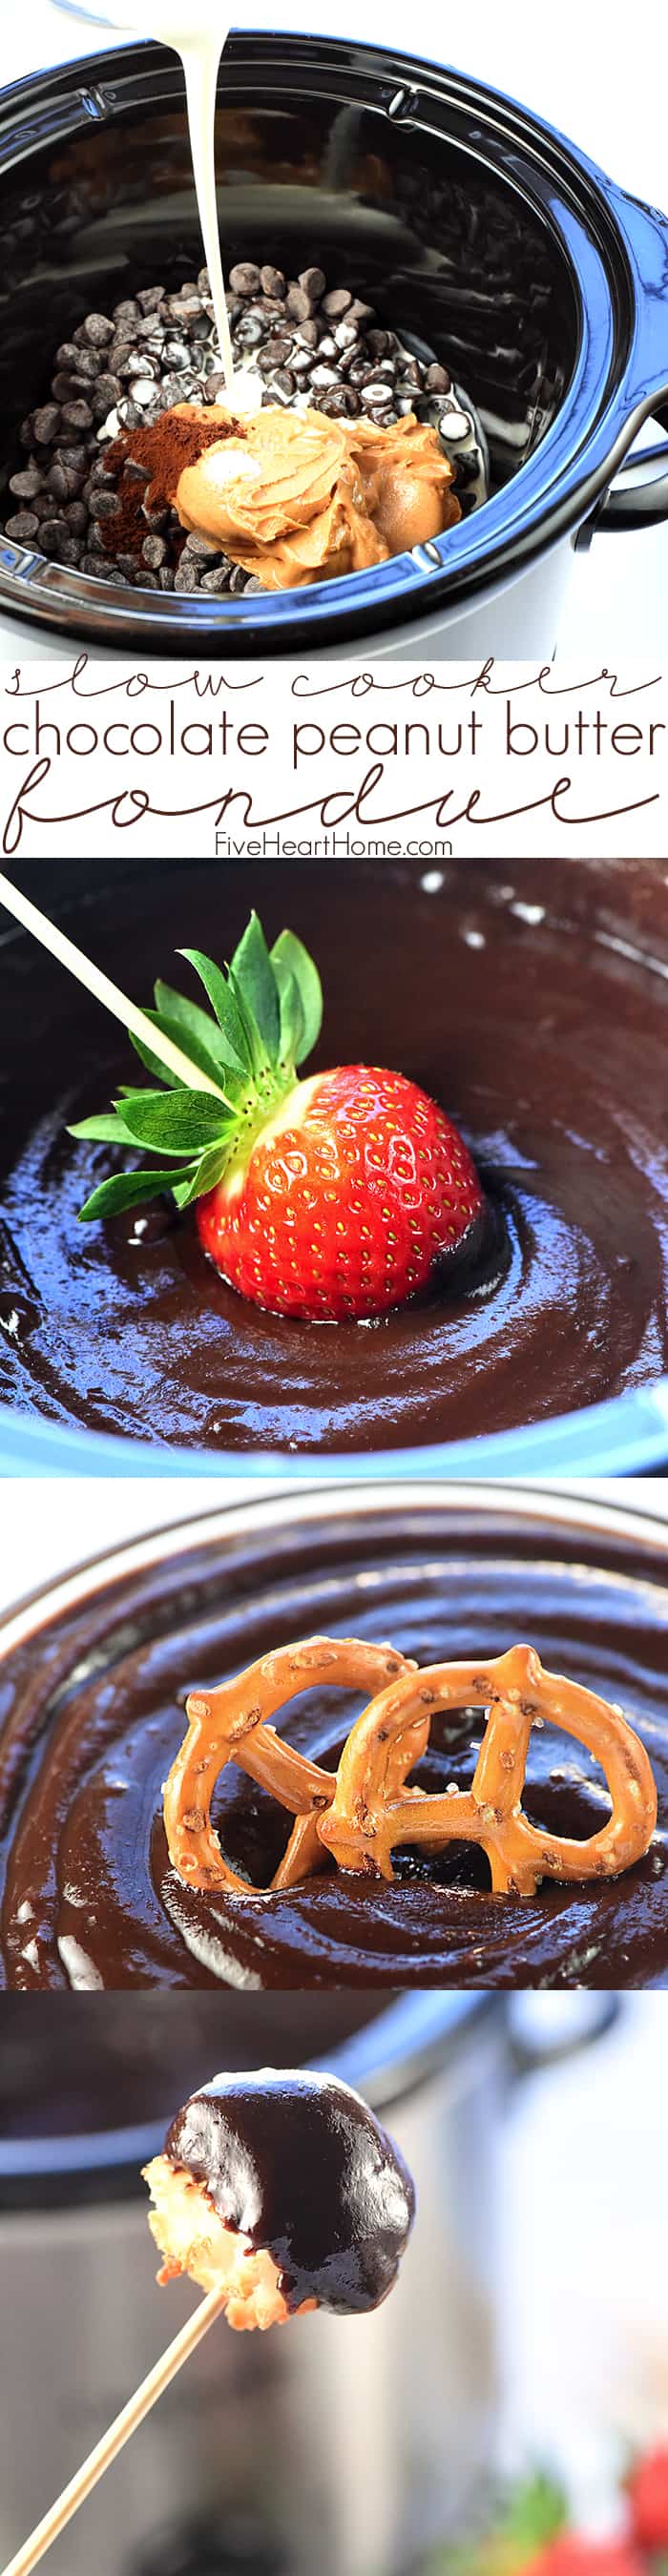 Slow Cooker Chocolate Peanut Butter Fondue ~ a decadent, glossy, chocolate dessert recipe kissed with peanut butter, the perfect crock pot dip for your favorite fruit and confections on Valentine's Day or any day! | FiveHeartHome.com via @fivehearthome